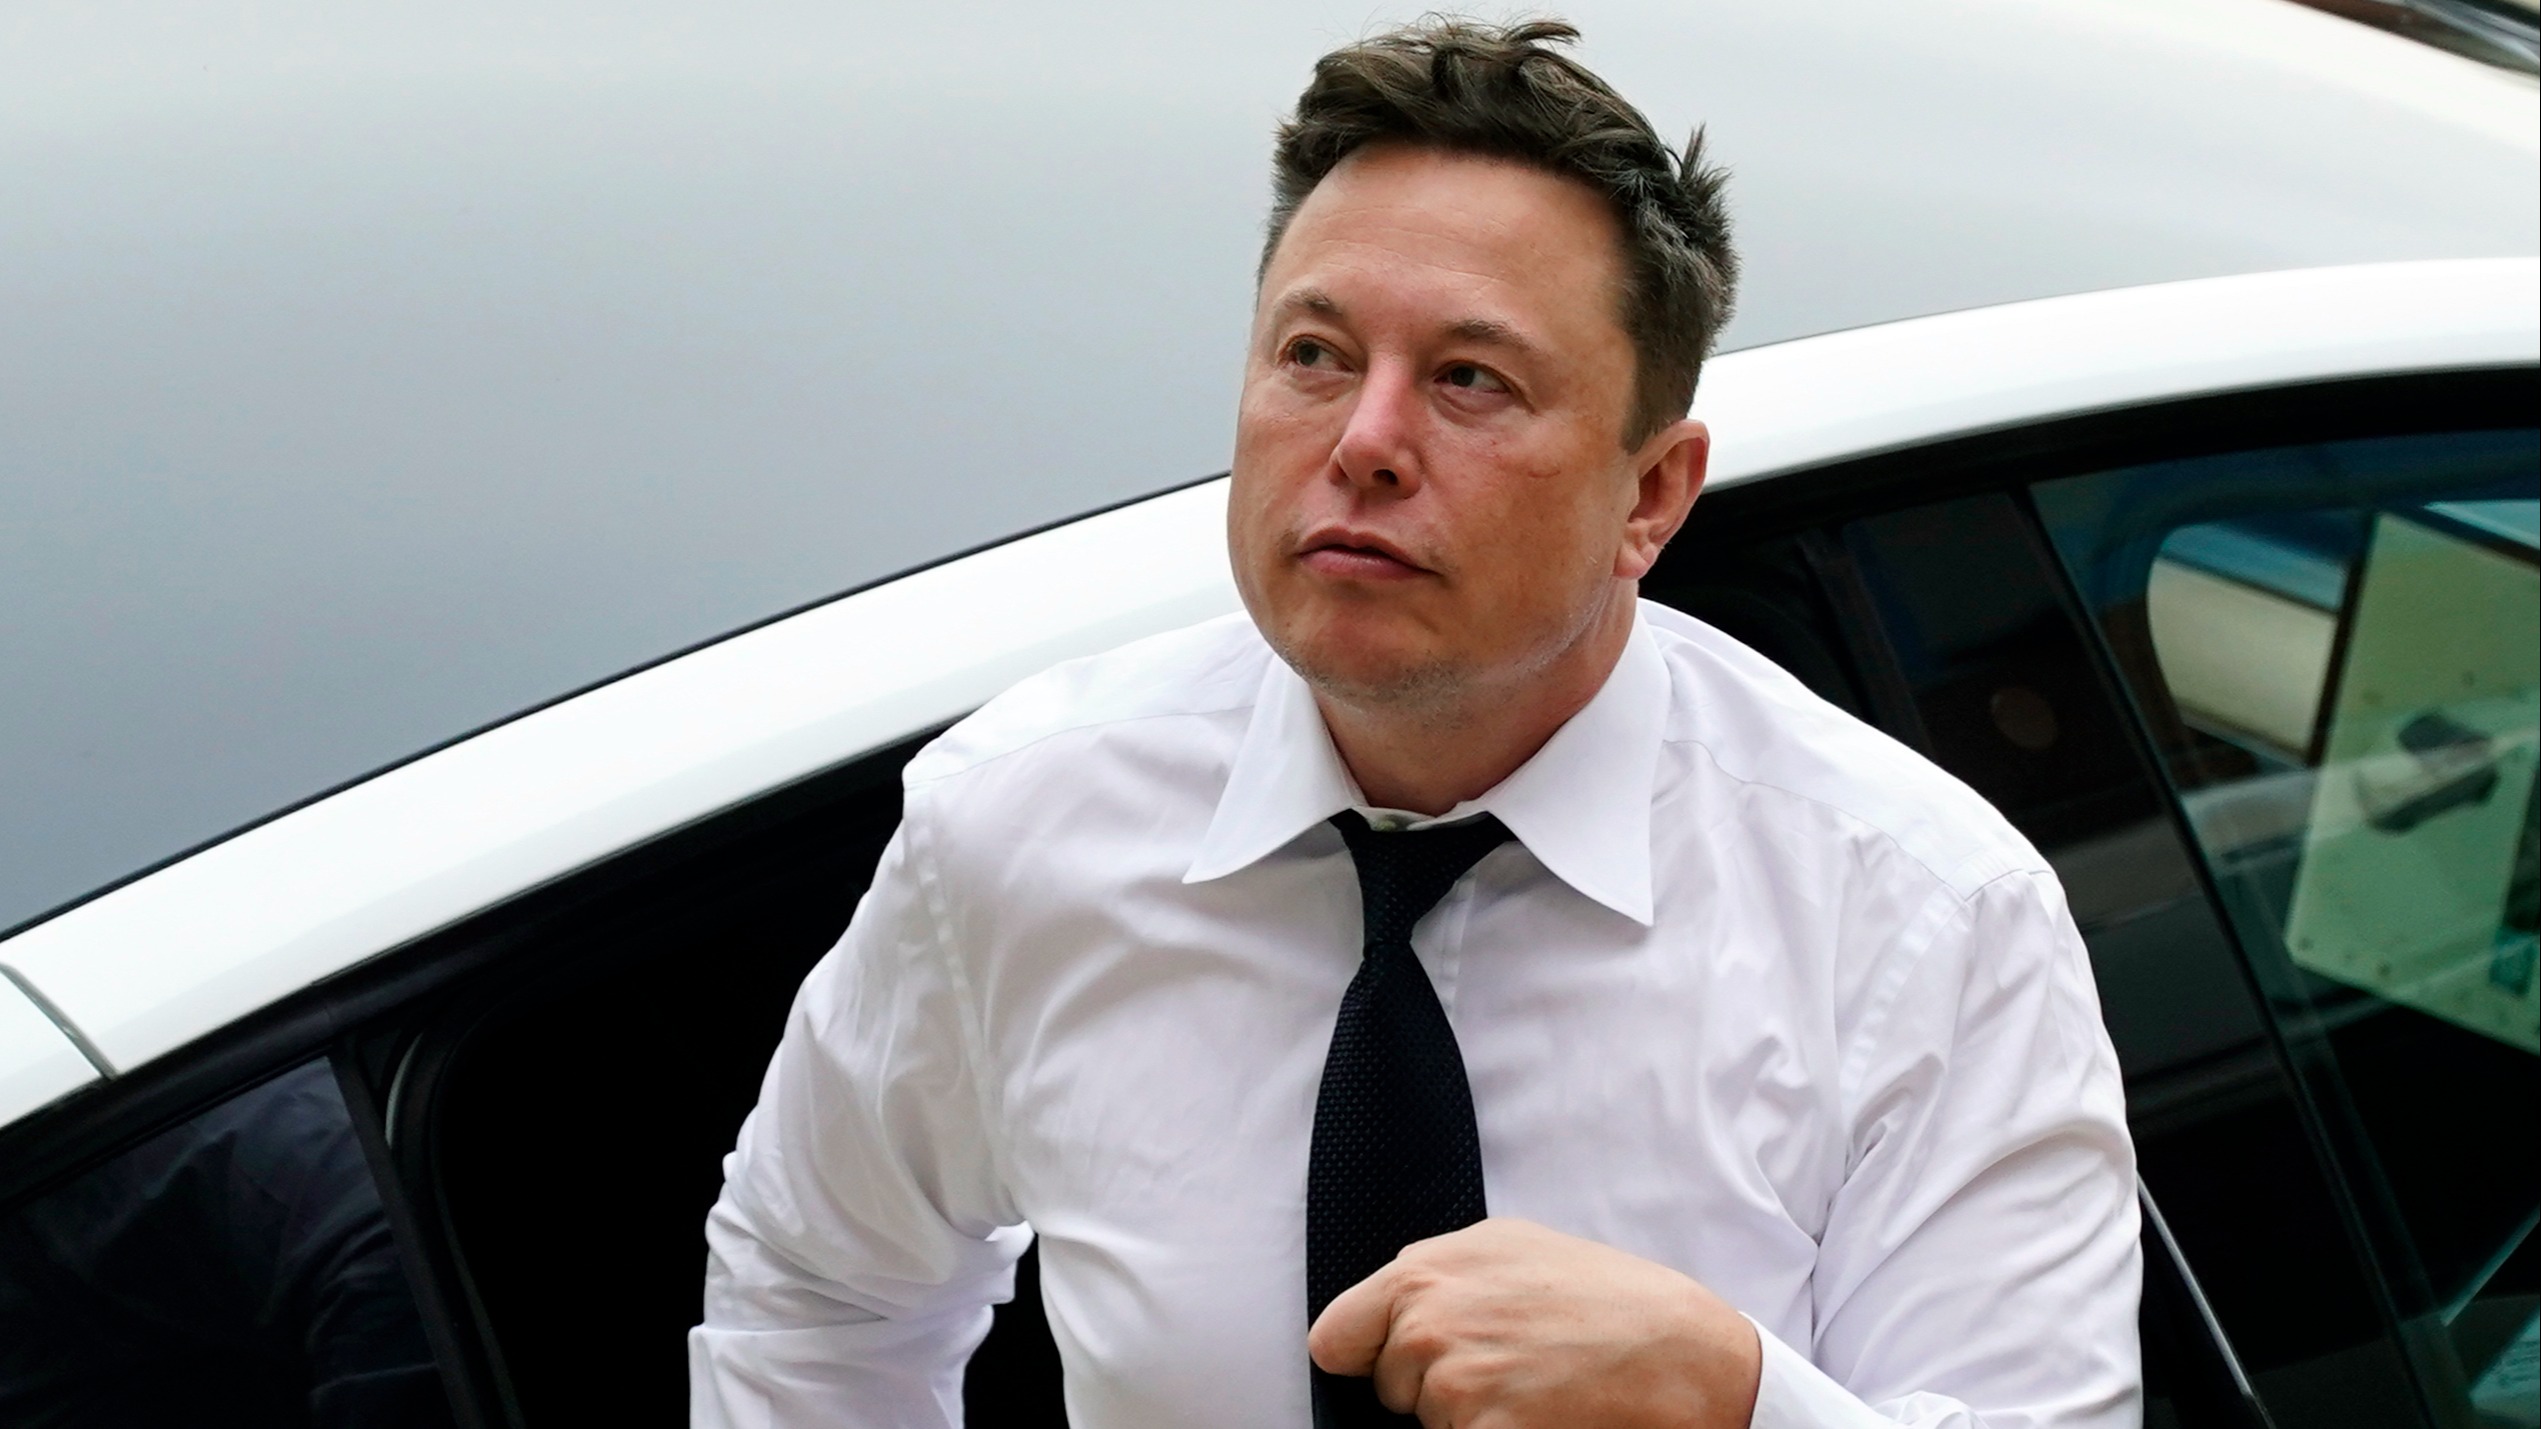 Elon Musk Appears In Court To Defend Tesla Buyout Tweets After Lawsuit Alleging He Misled 